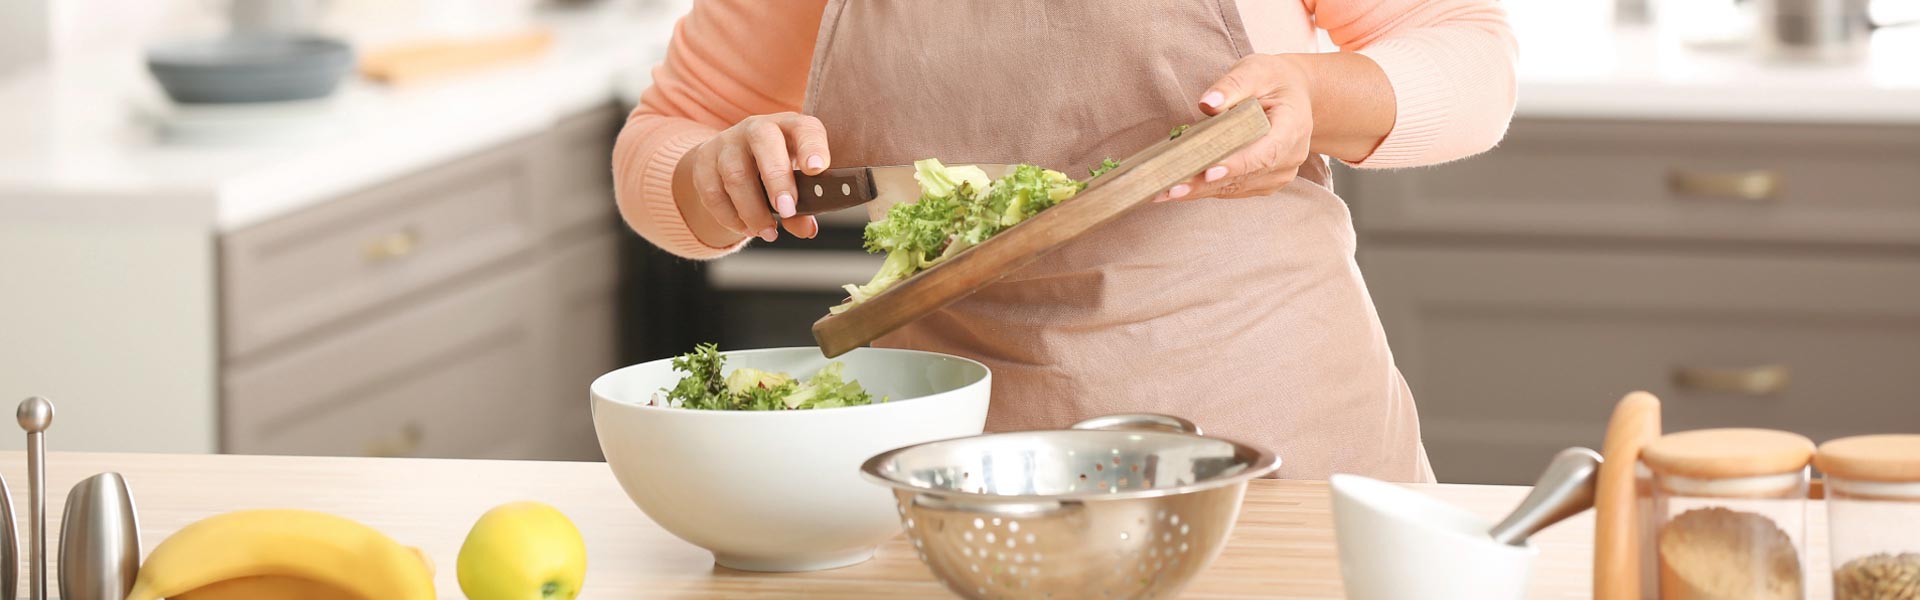 A woman in the kitchen preparing a salad